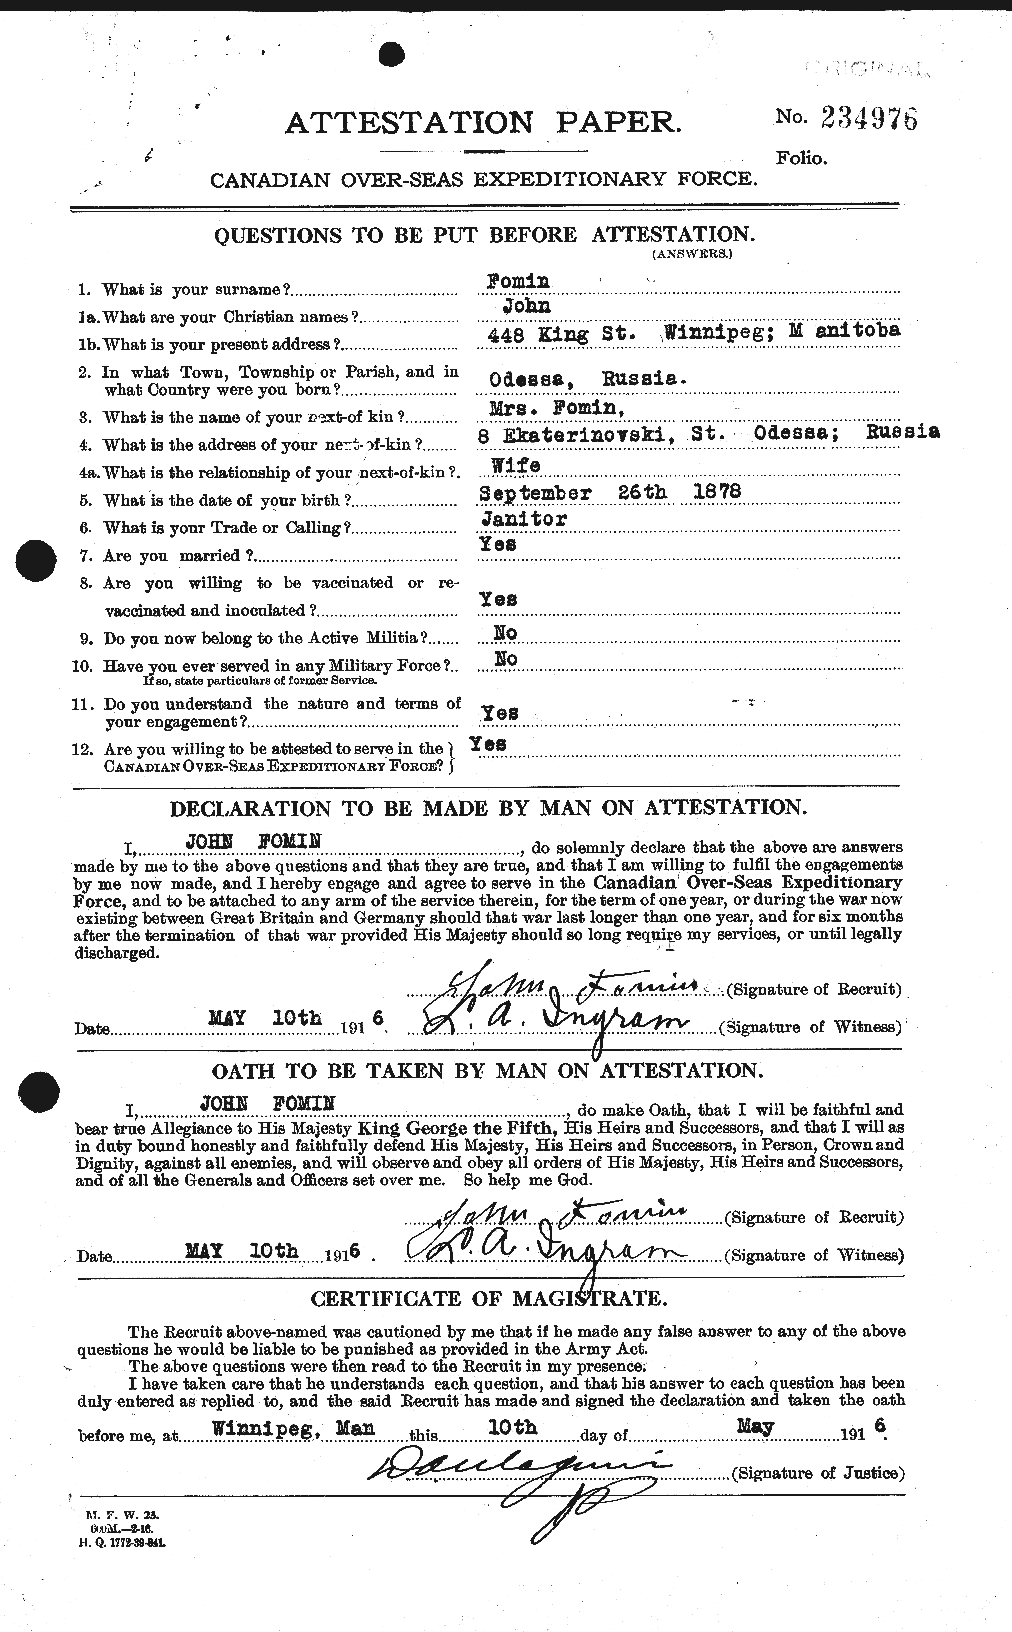 Personnel Records of the First World War - CEF 328424a